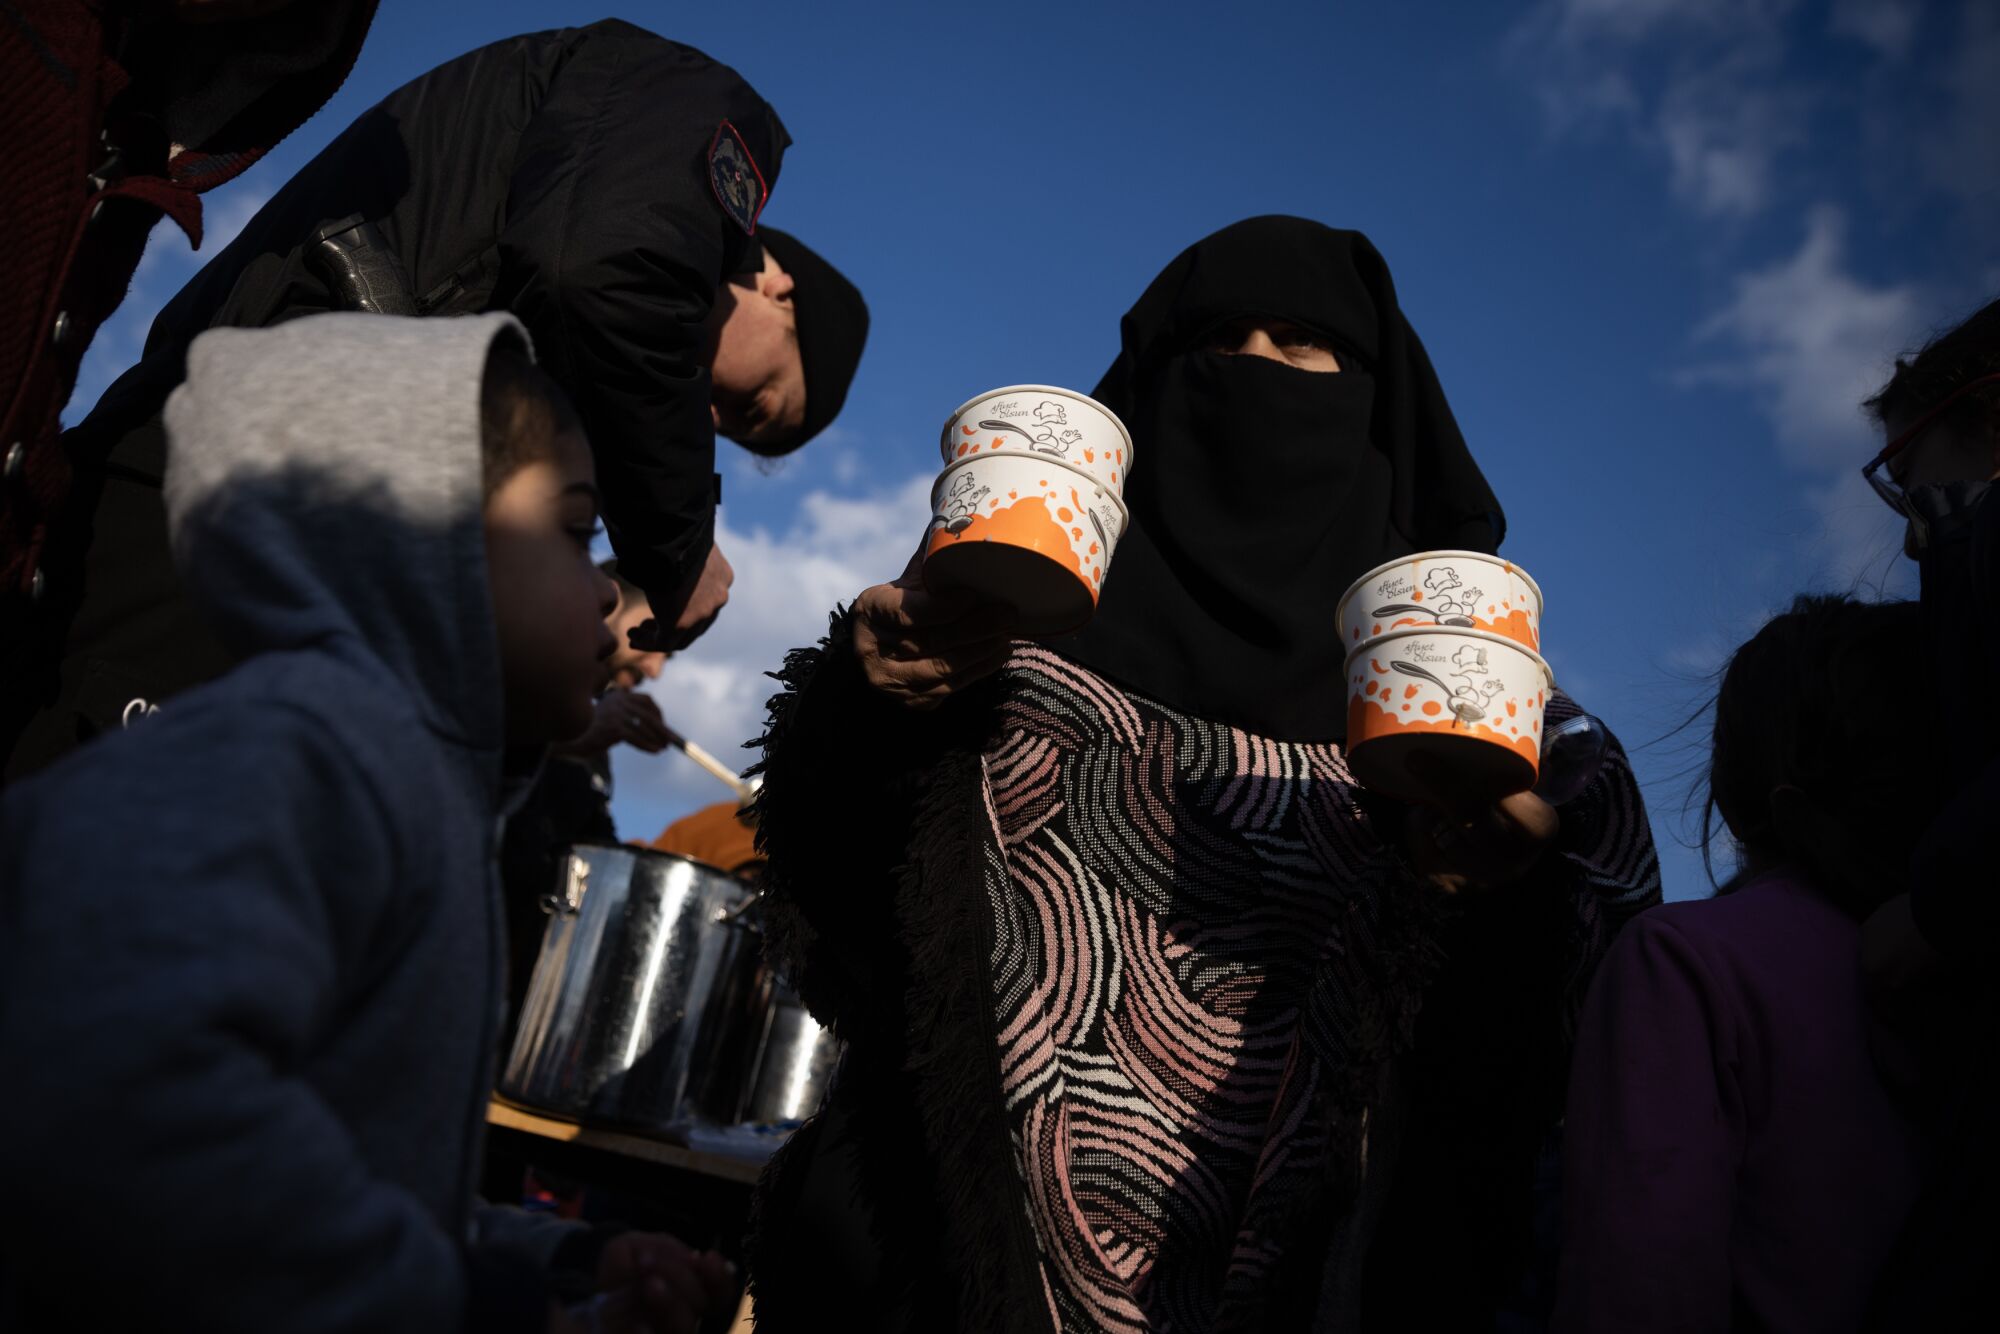 A woman balances several bowls as she stands in a food line near children.